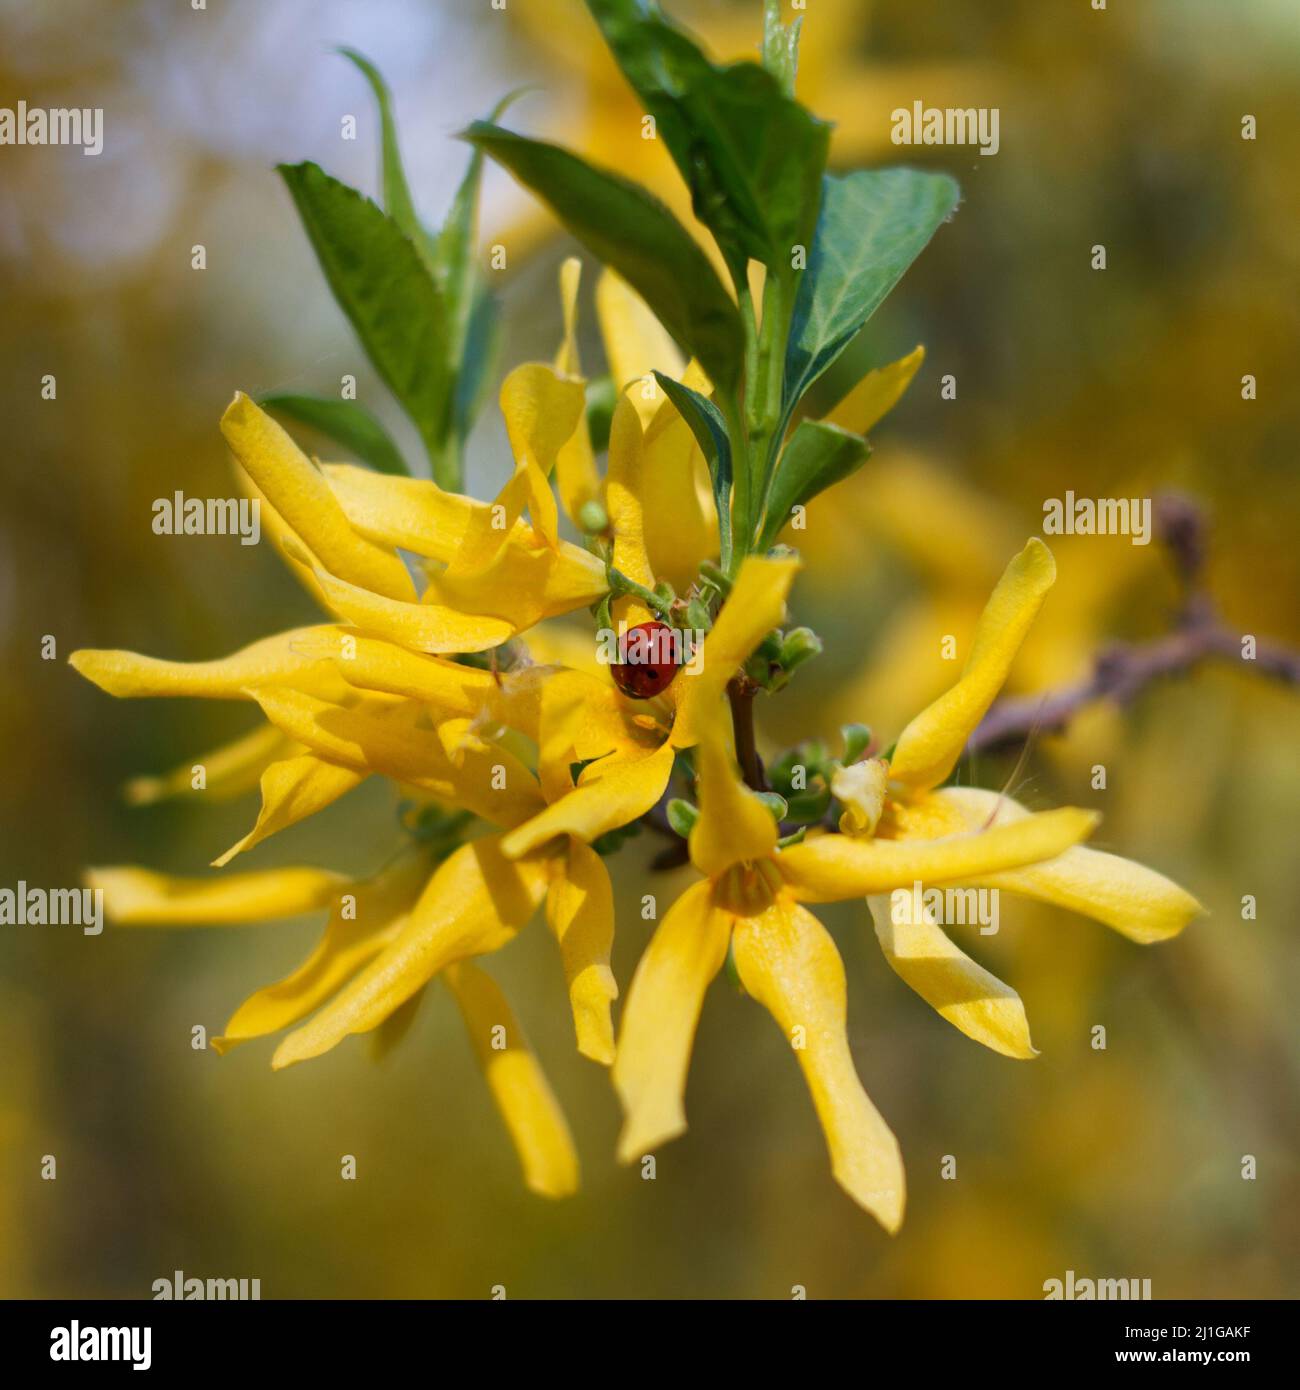 Forsiphy shrub tree beautifully flowering in yellow with an insect, ladybug in the park Stock Photo